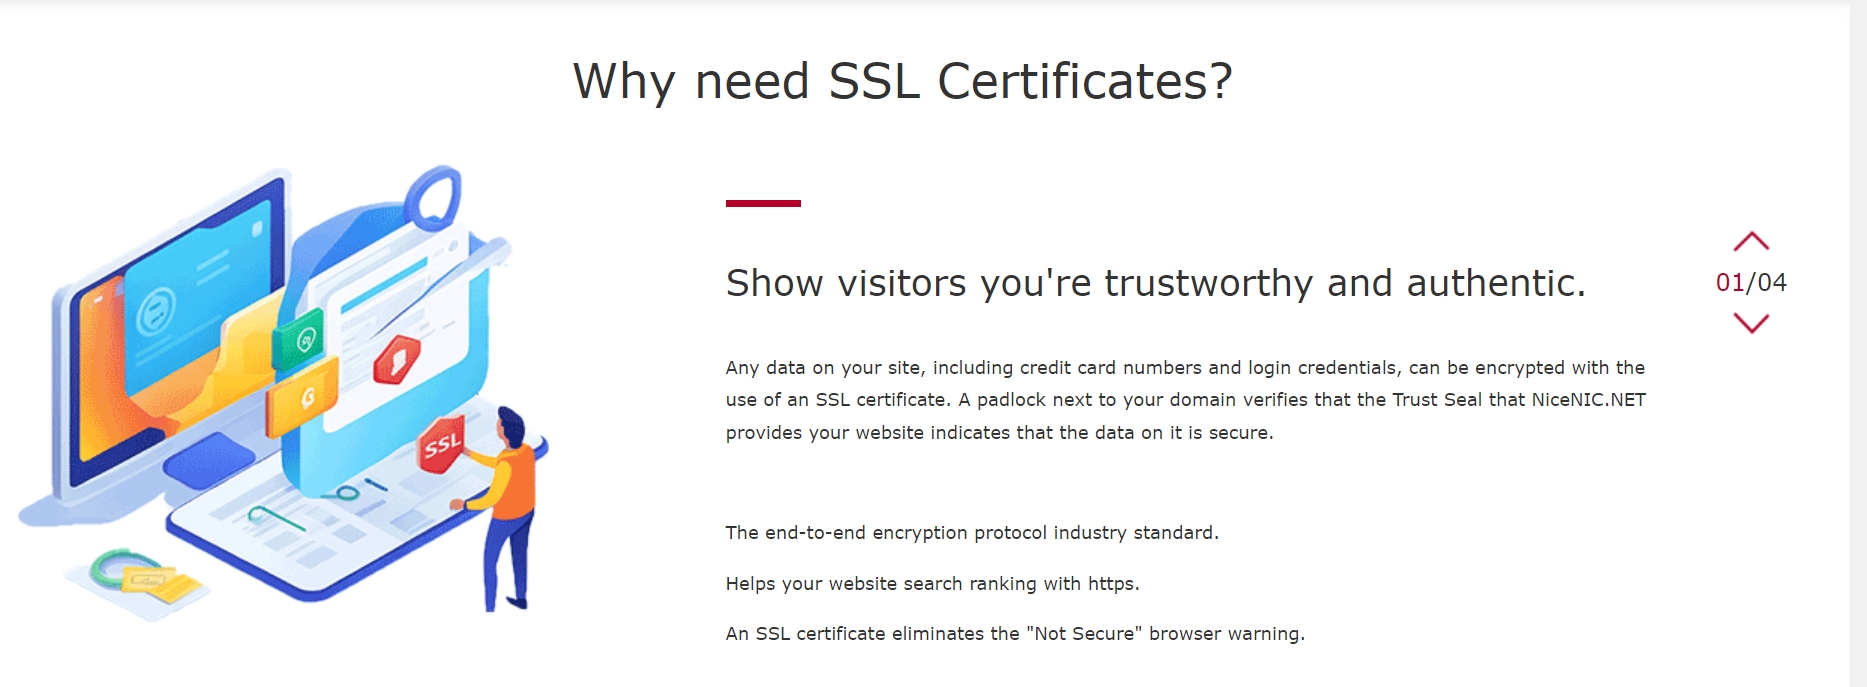 What features or benefits set NICENIC apart as a preferred provider for SSL certificates?